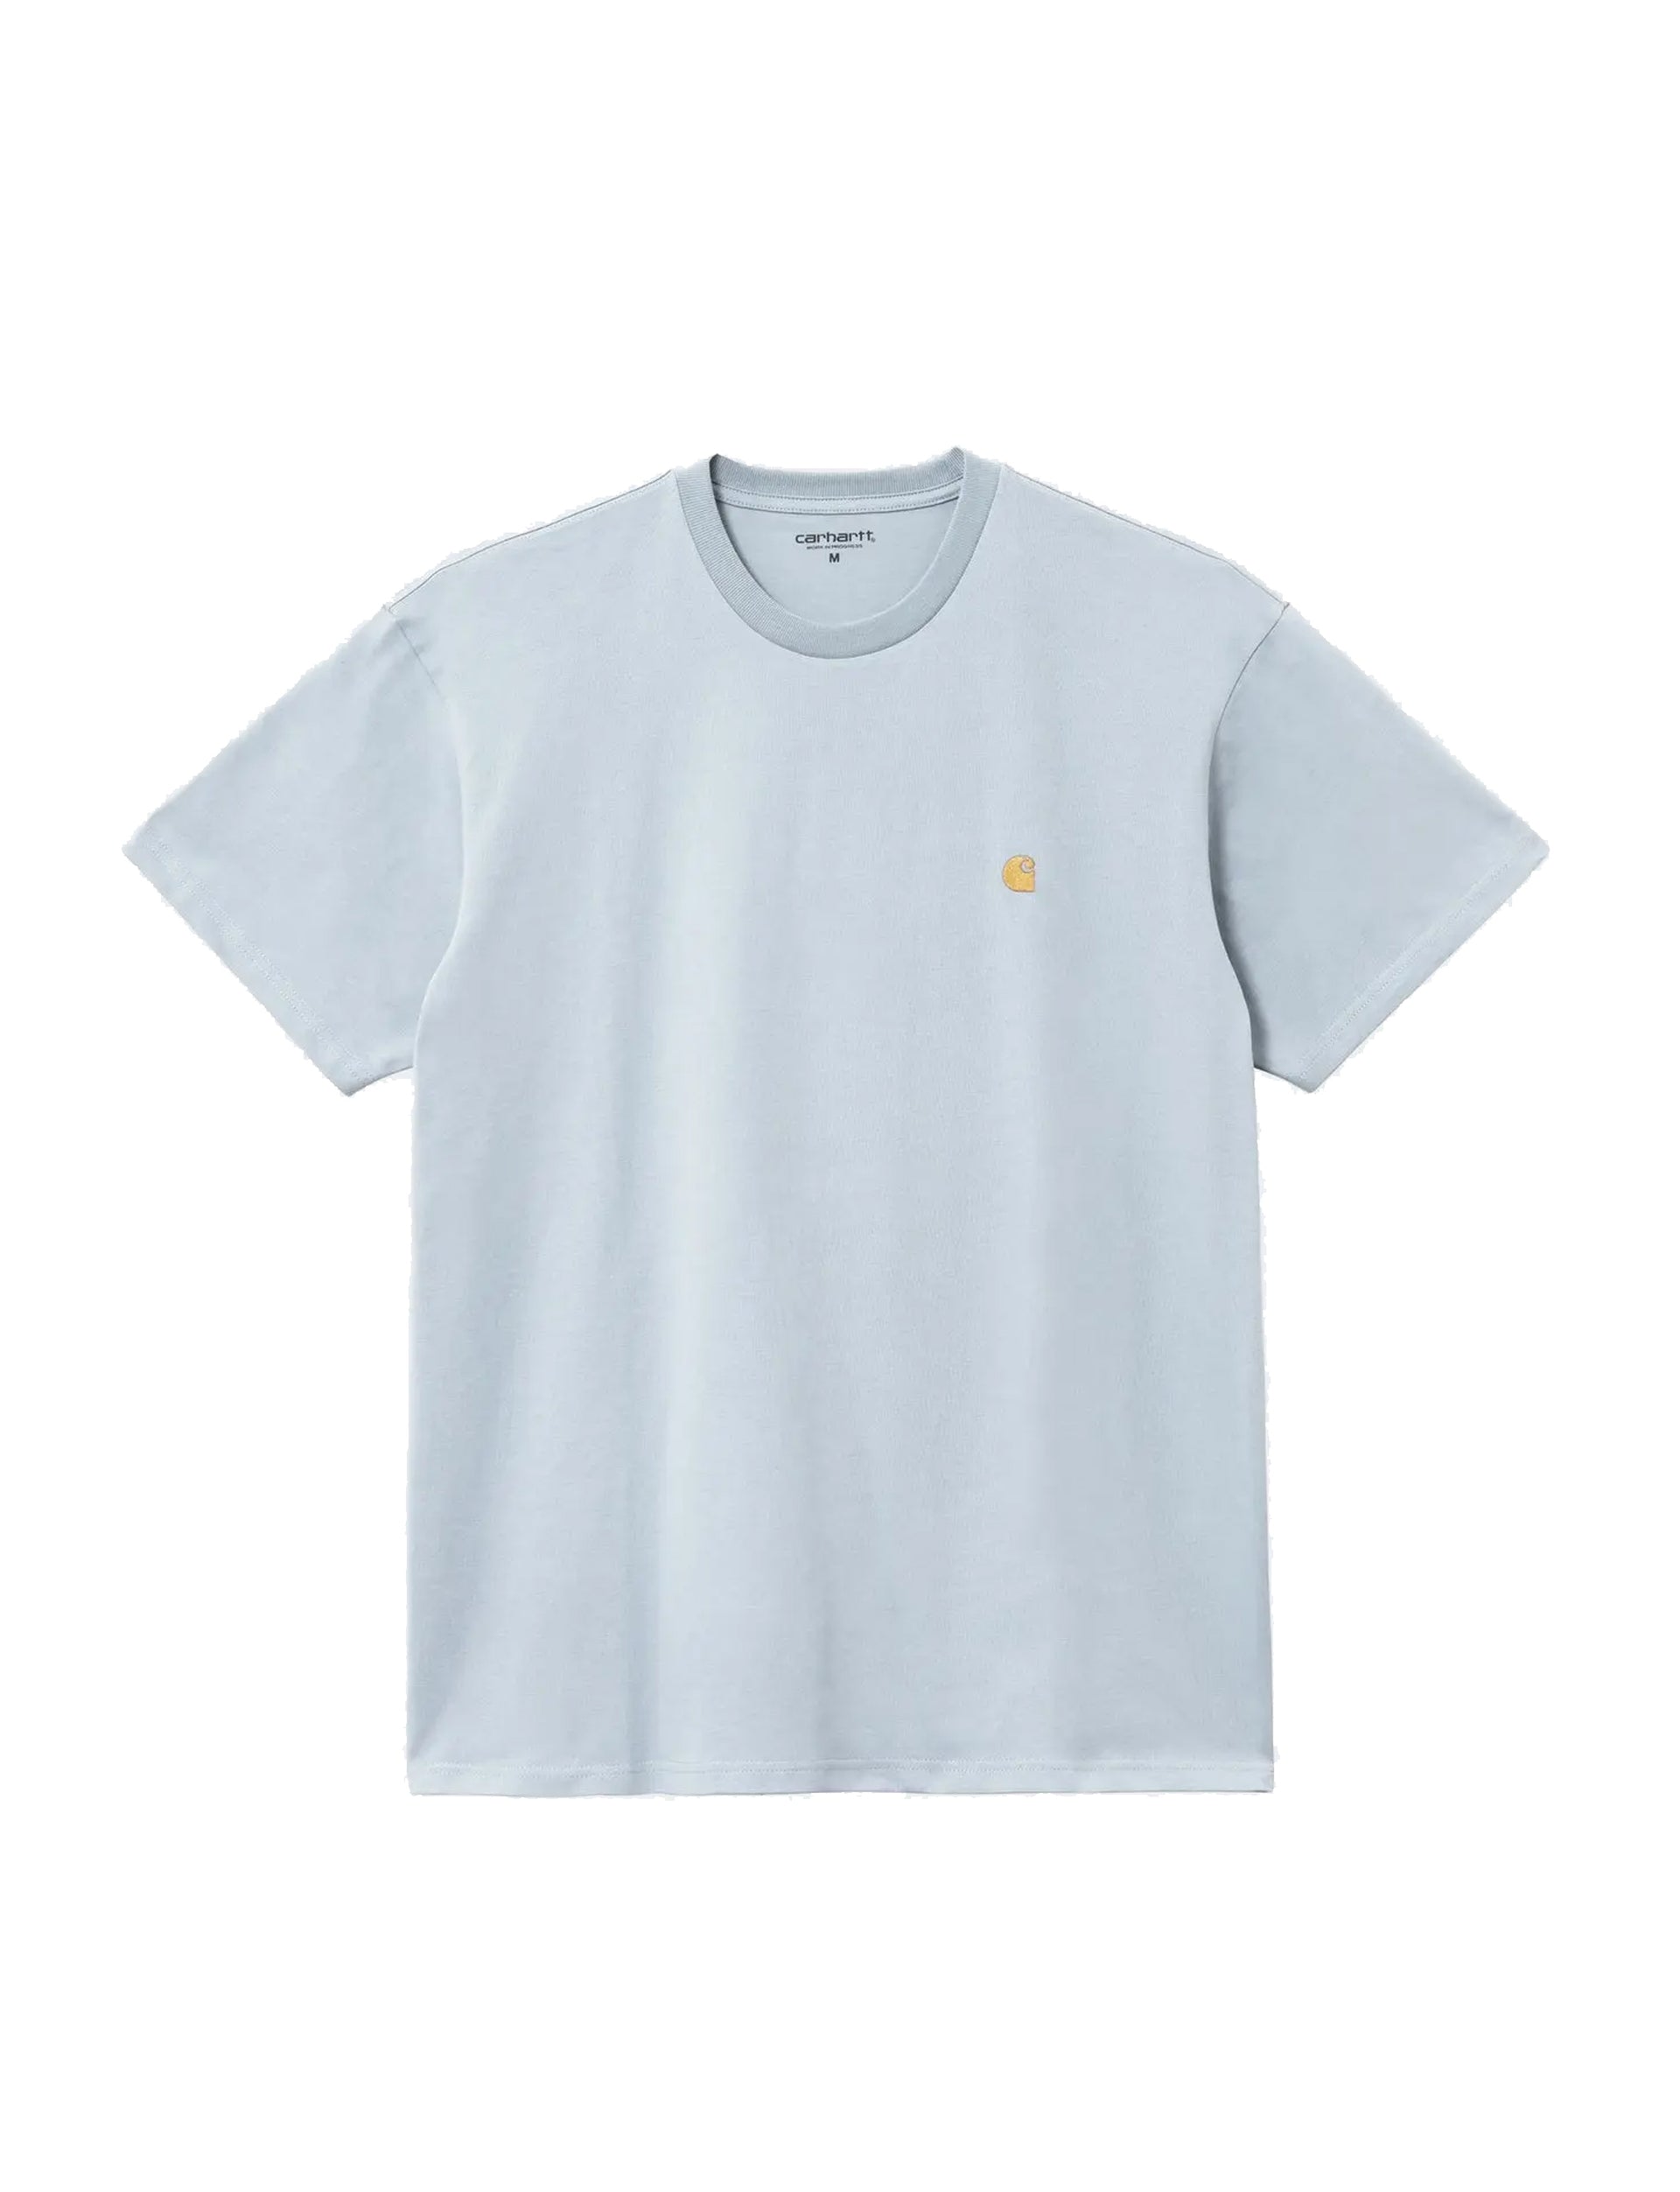 CARHARTT WIP S/S CHASE T-SHIRT ICARUS